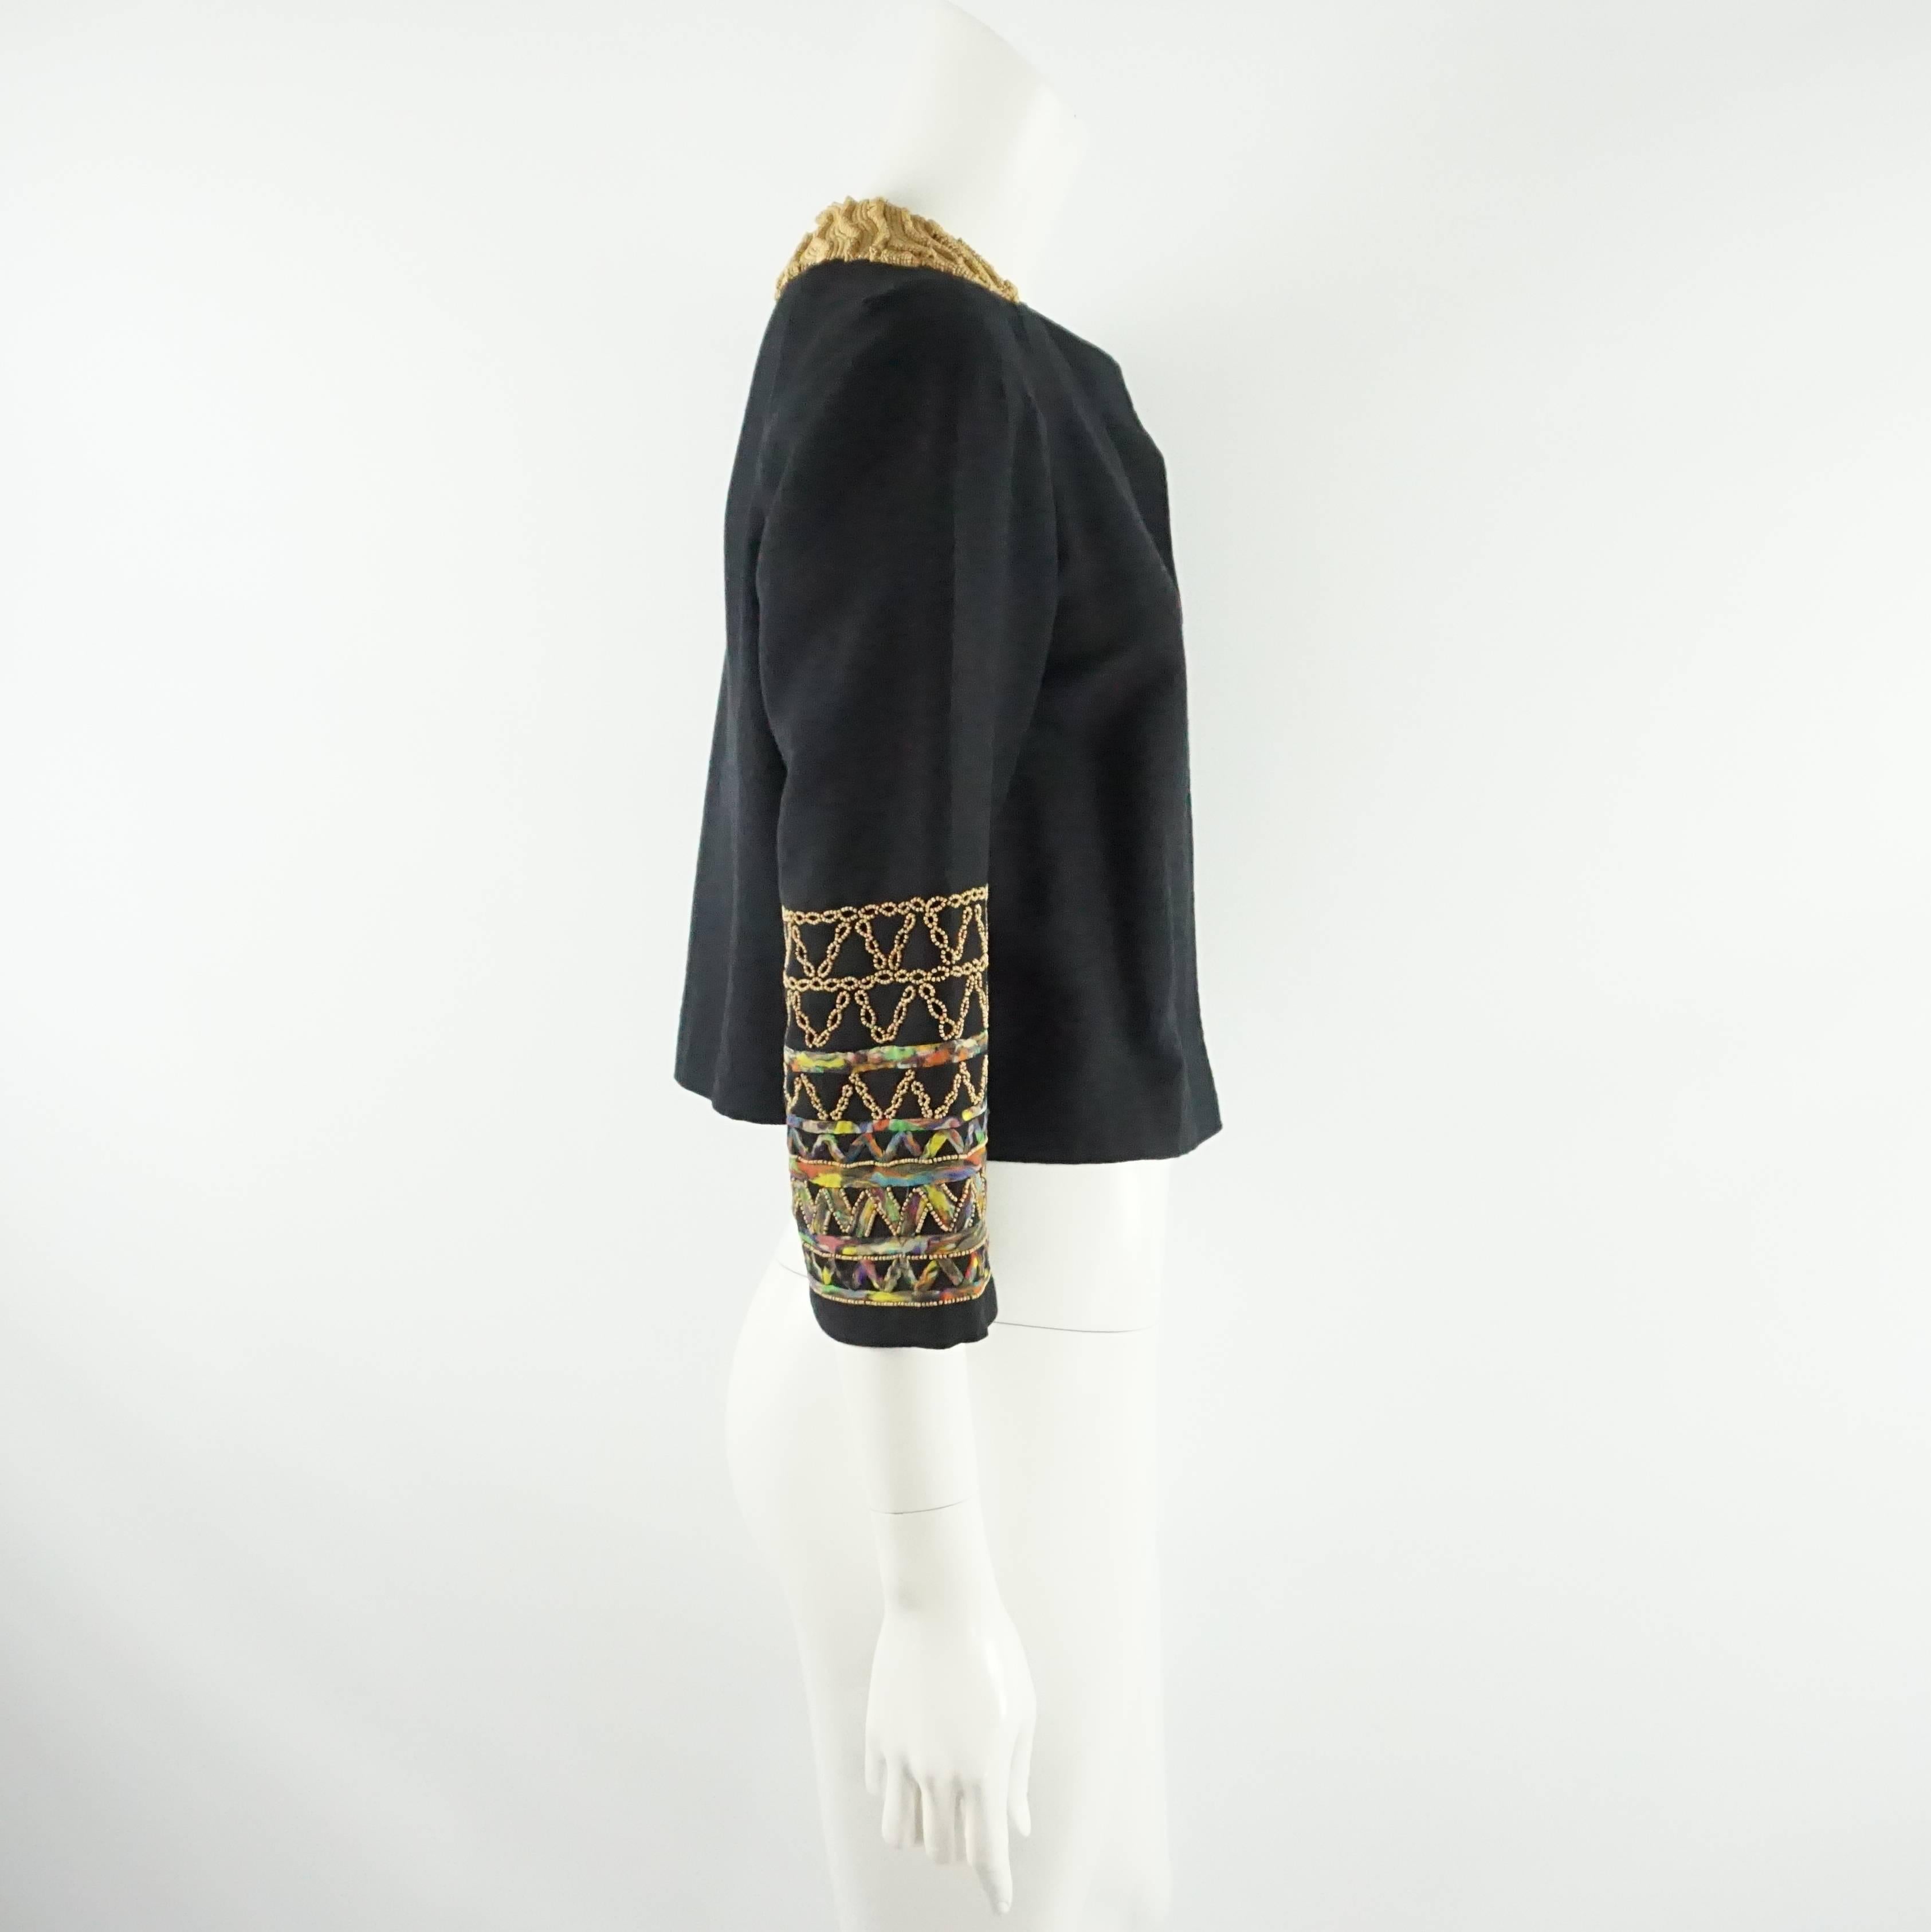 This Dries Van Noten crop jacket is a cotton-wool blend with wood beading on the neckline and sleeves. The sleeves also have a multi ruched fabric stitched into the beaded design. The jacket is in excellent condition with light wear.